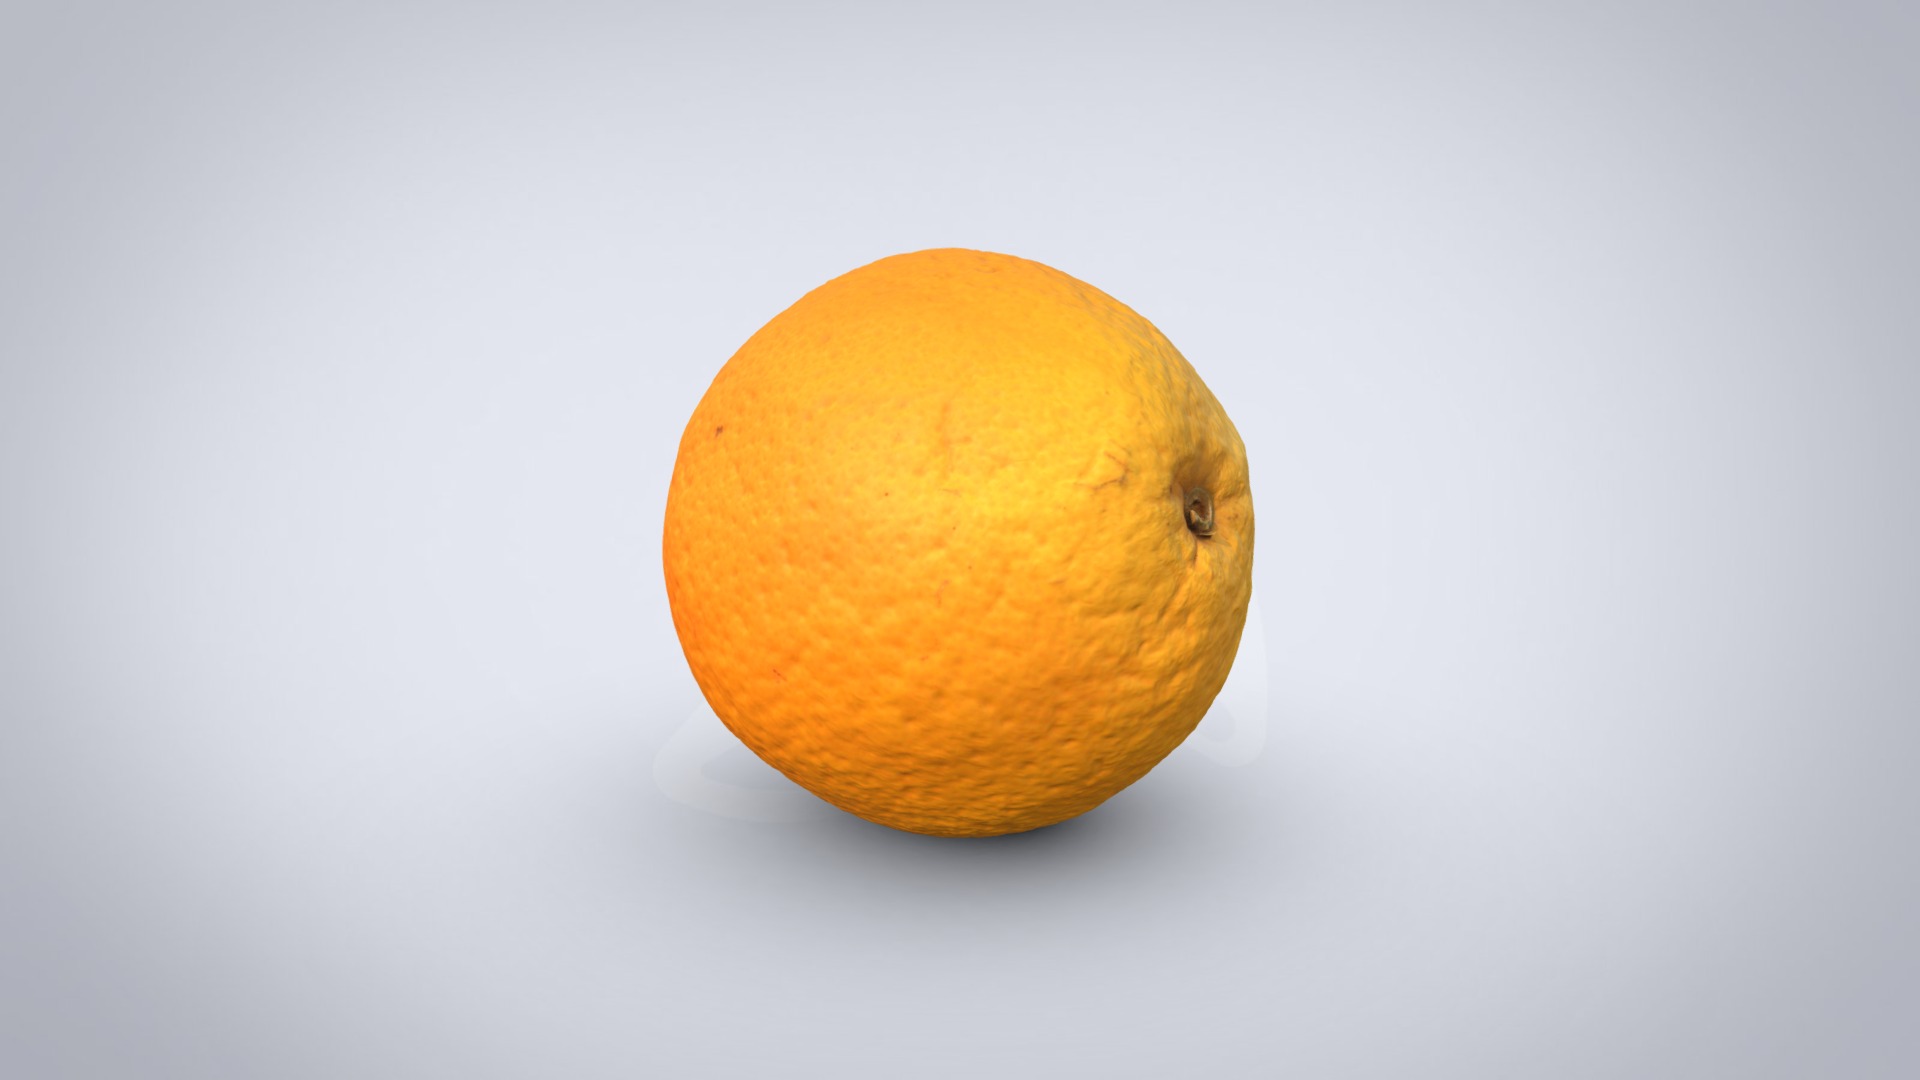 3D model Orange - This is a 3D model of the Orange. The 3D model is about an orange on a white background.